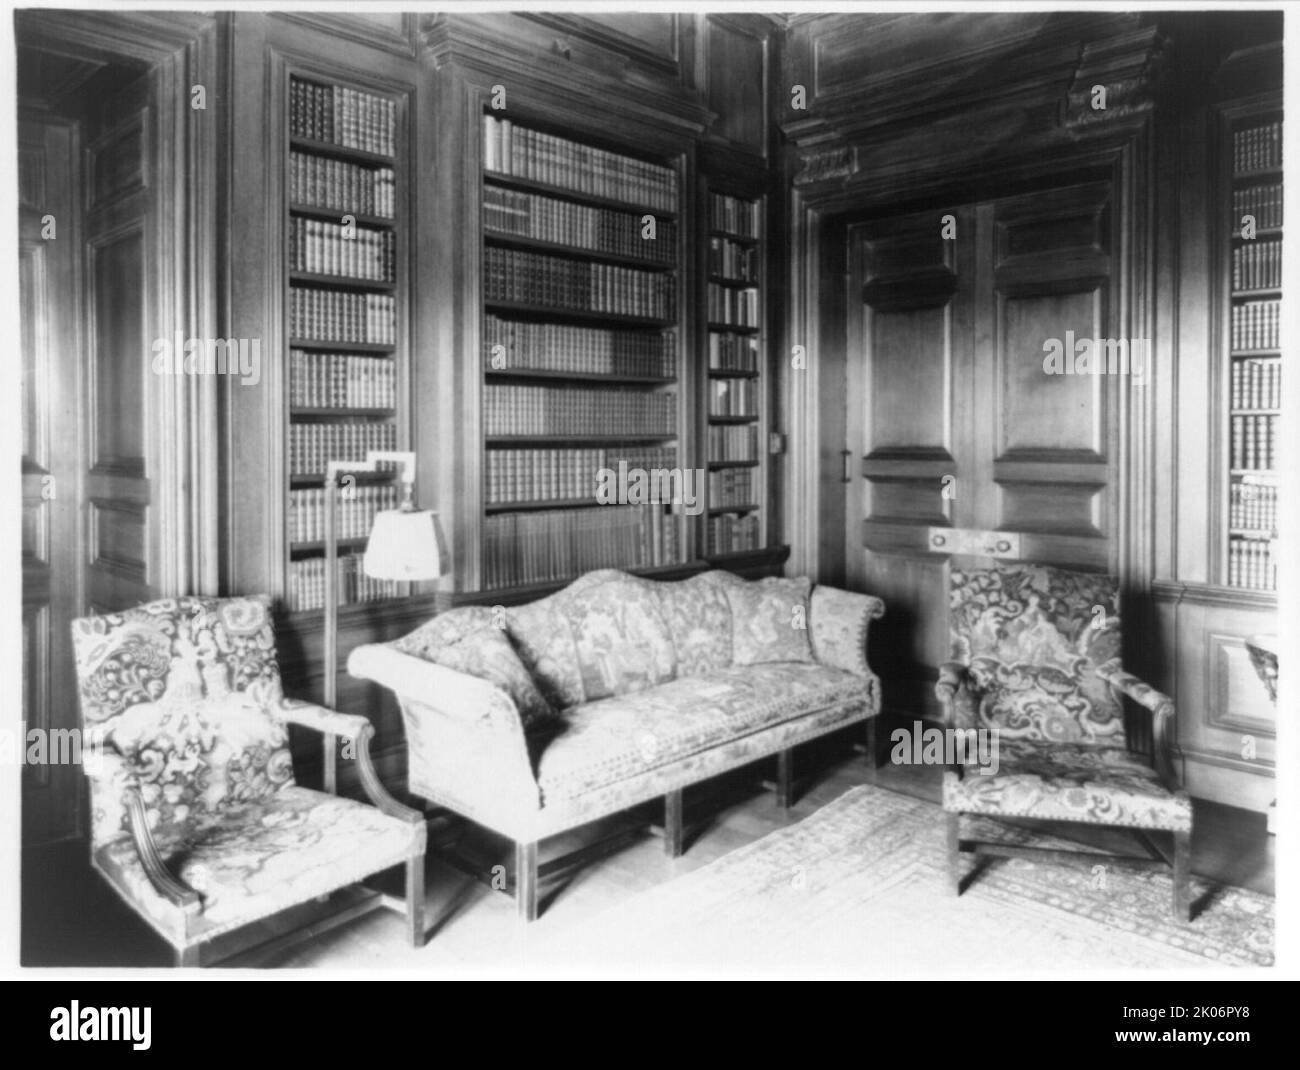 Library in Mrs. Hamilton Rice home, Newport, Rhode Island, 1917. The Miramar neoclassical mansion was designed by Horace Trumbauer for George Widener and Eleanor Elkins Widener. George and his son Harry died aboard the RMS Titanic in 1912. Eleanor married again and Miramar was used as a summer residence by her and her second husband geographer and explorer Alexander H. Rice Jr. Stock Photo